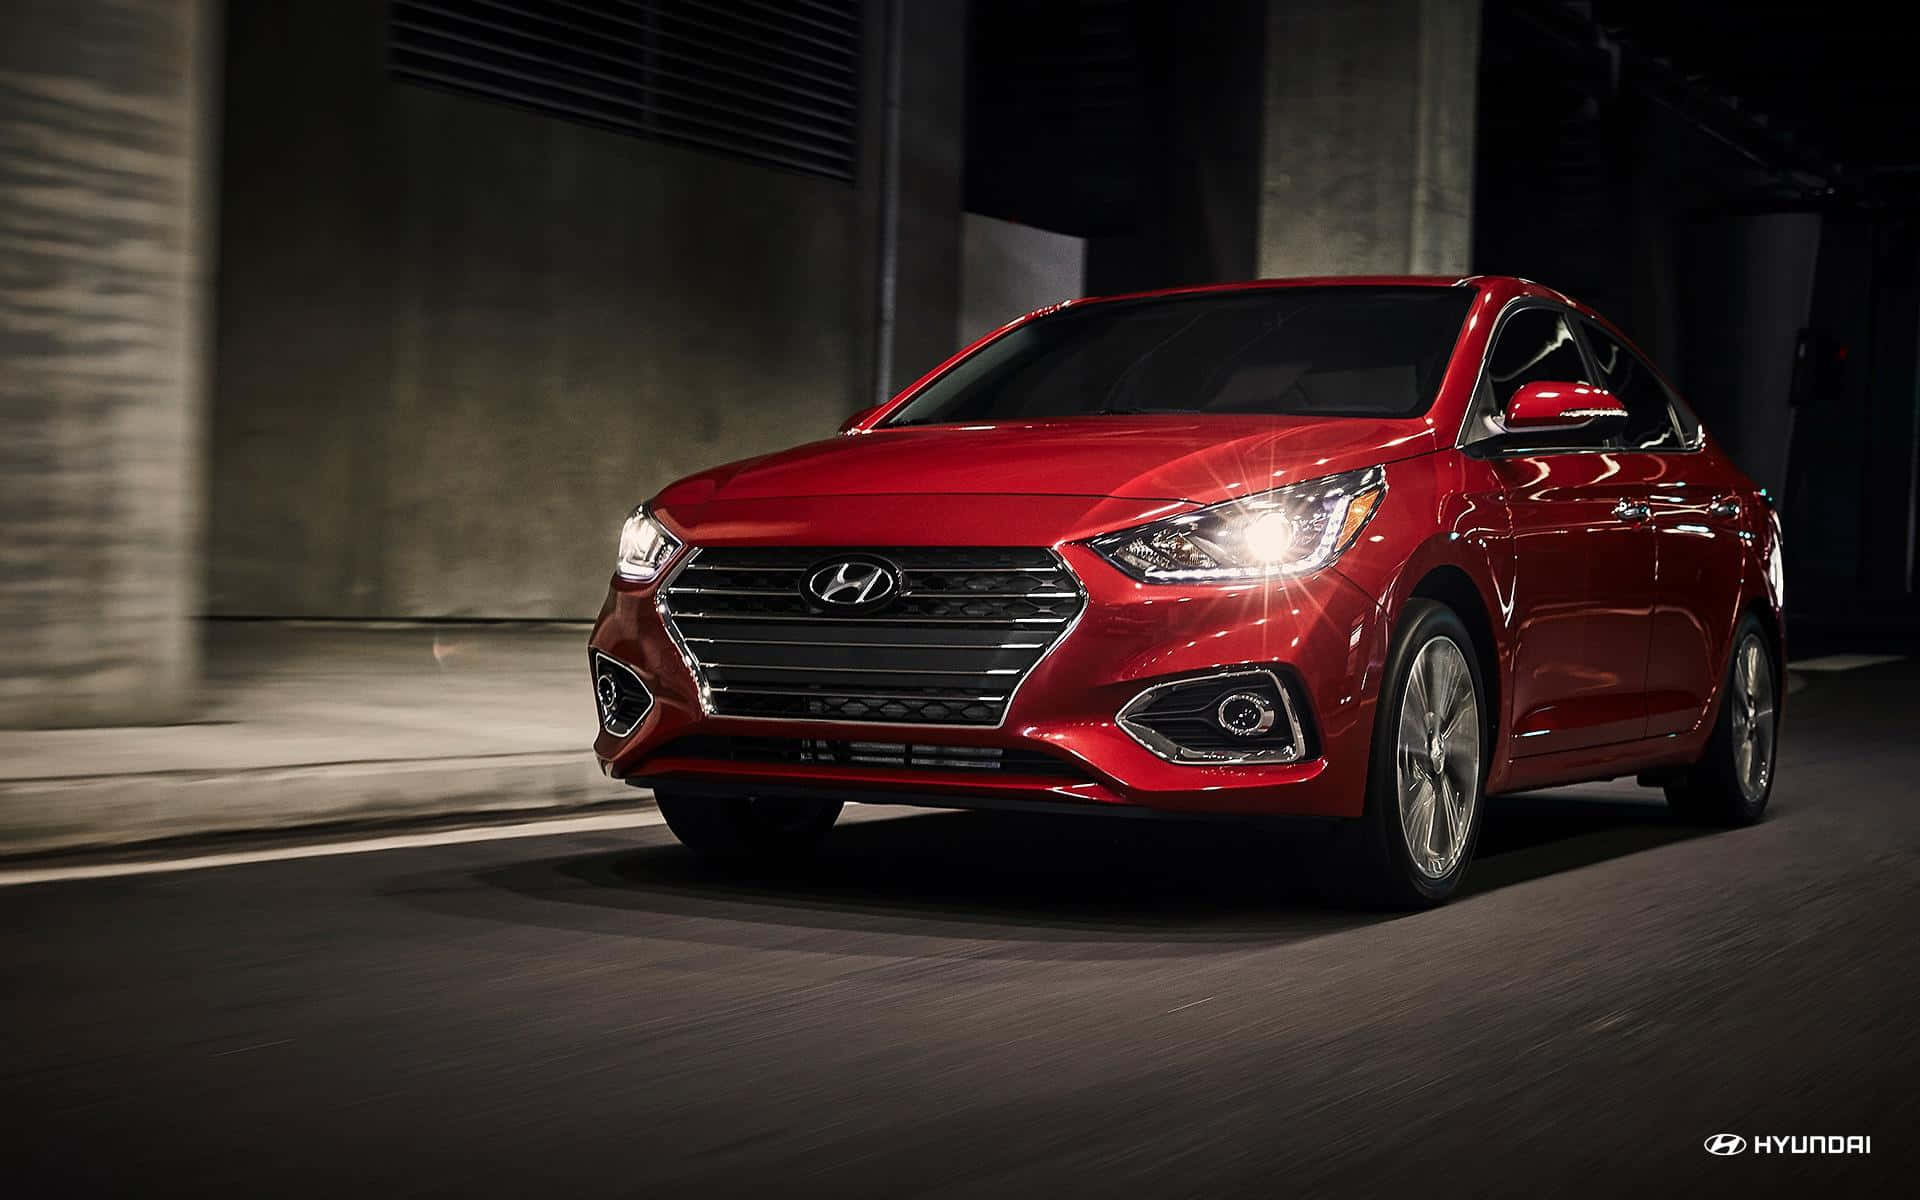 Sleek Red Hyundai Accent on the Road Wallpaper